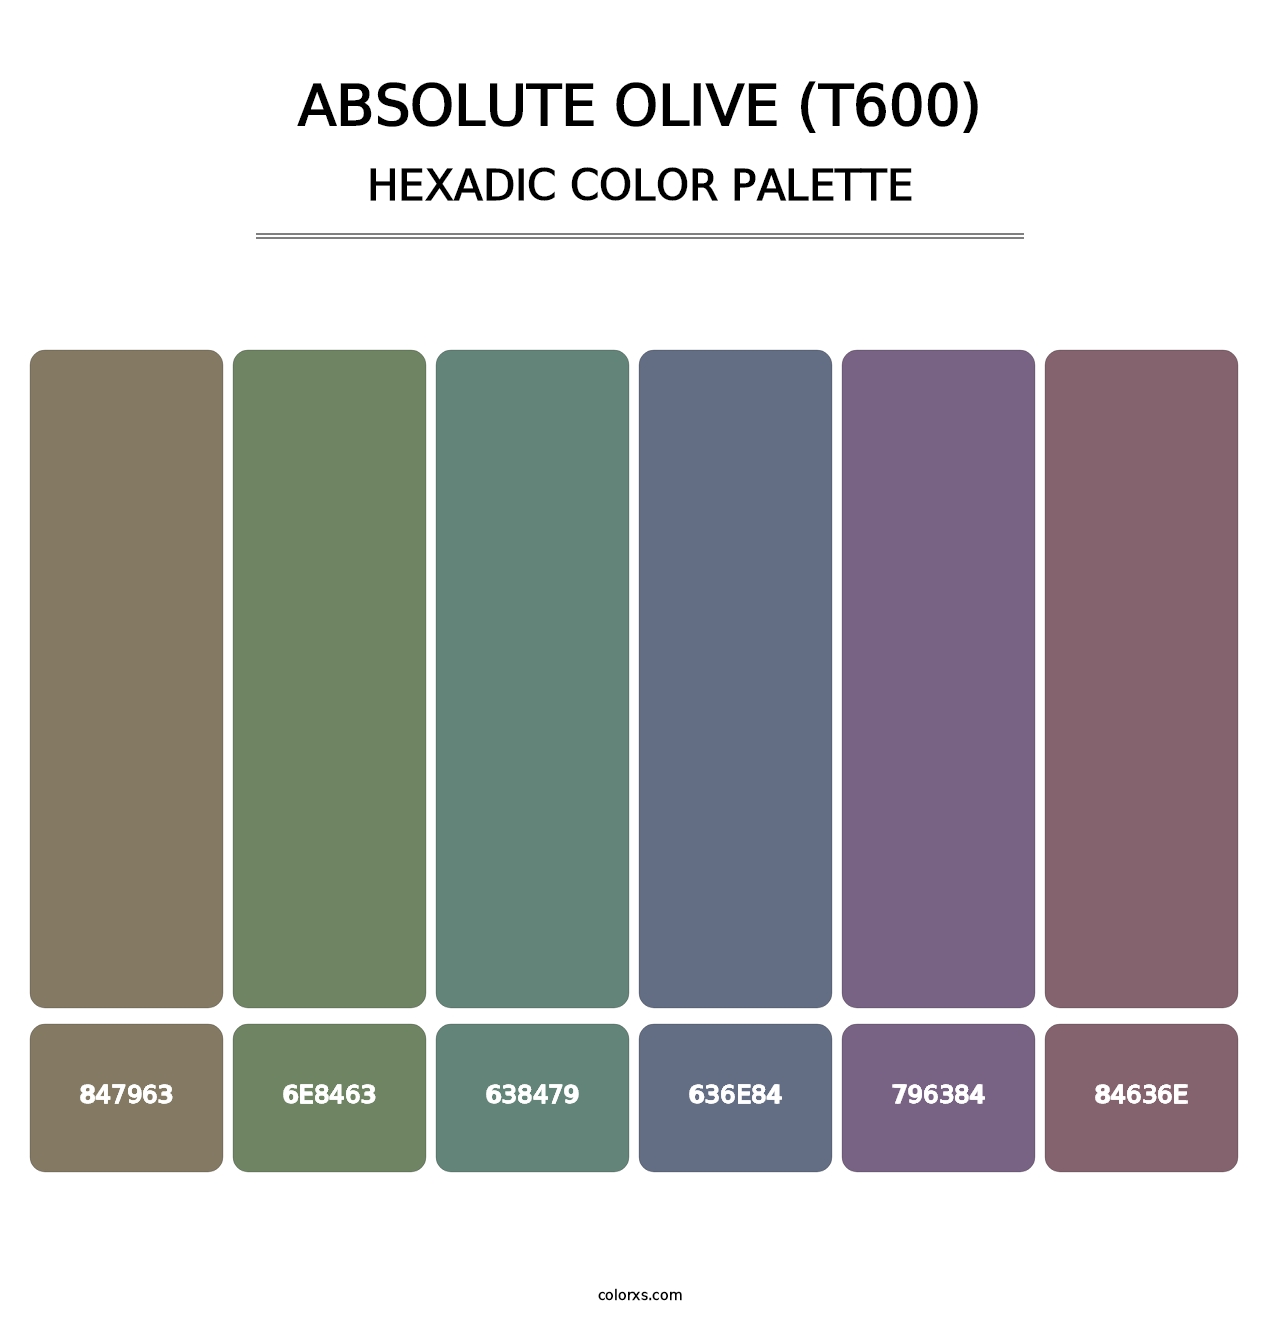 Absolute Olive (T600) - Hexadic Color Palette